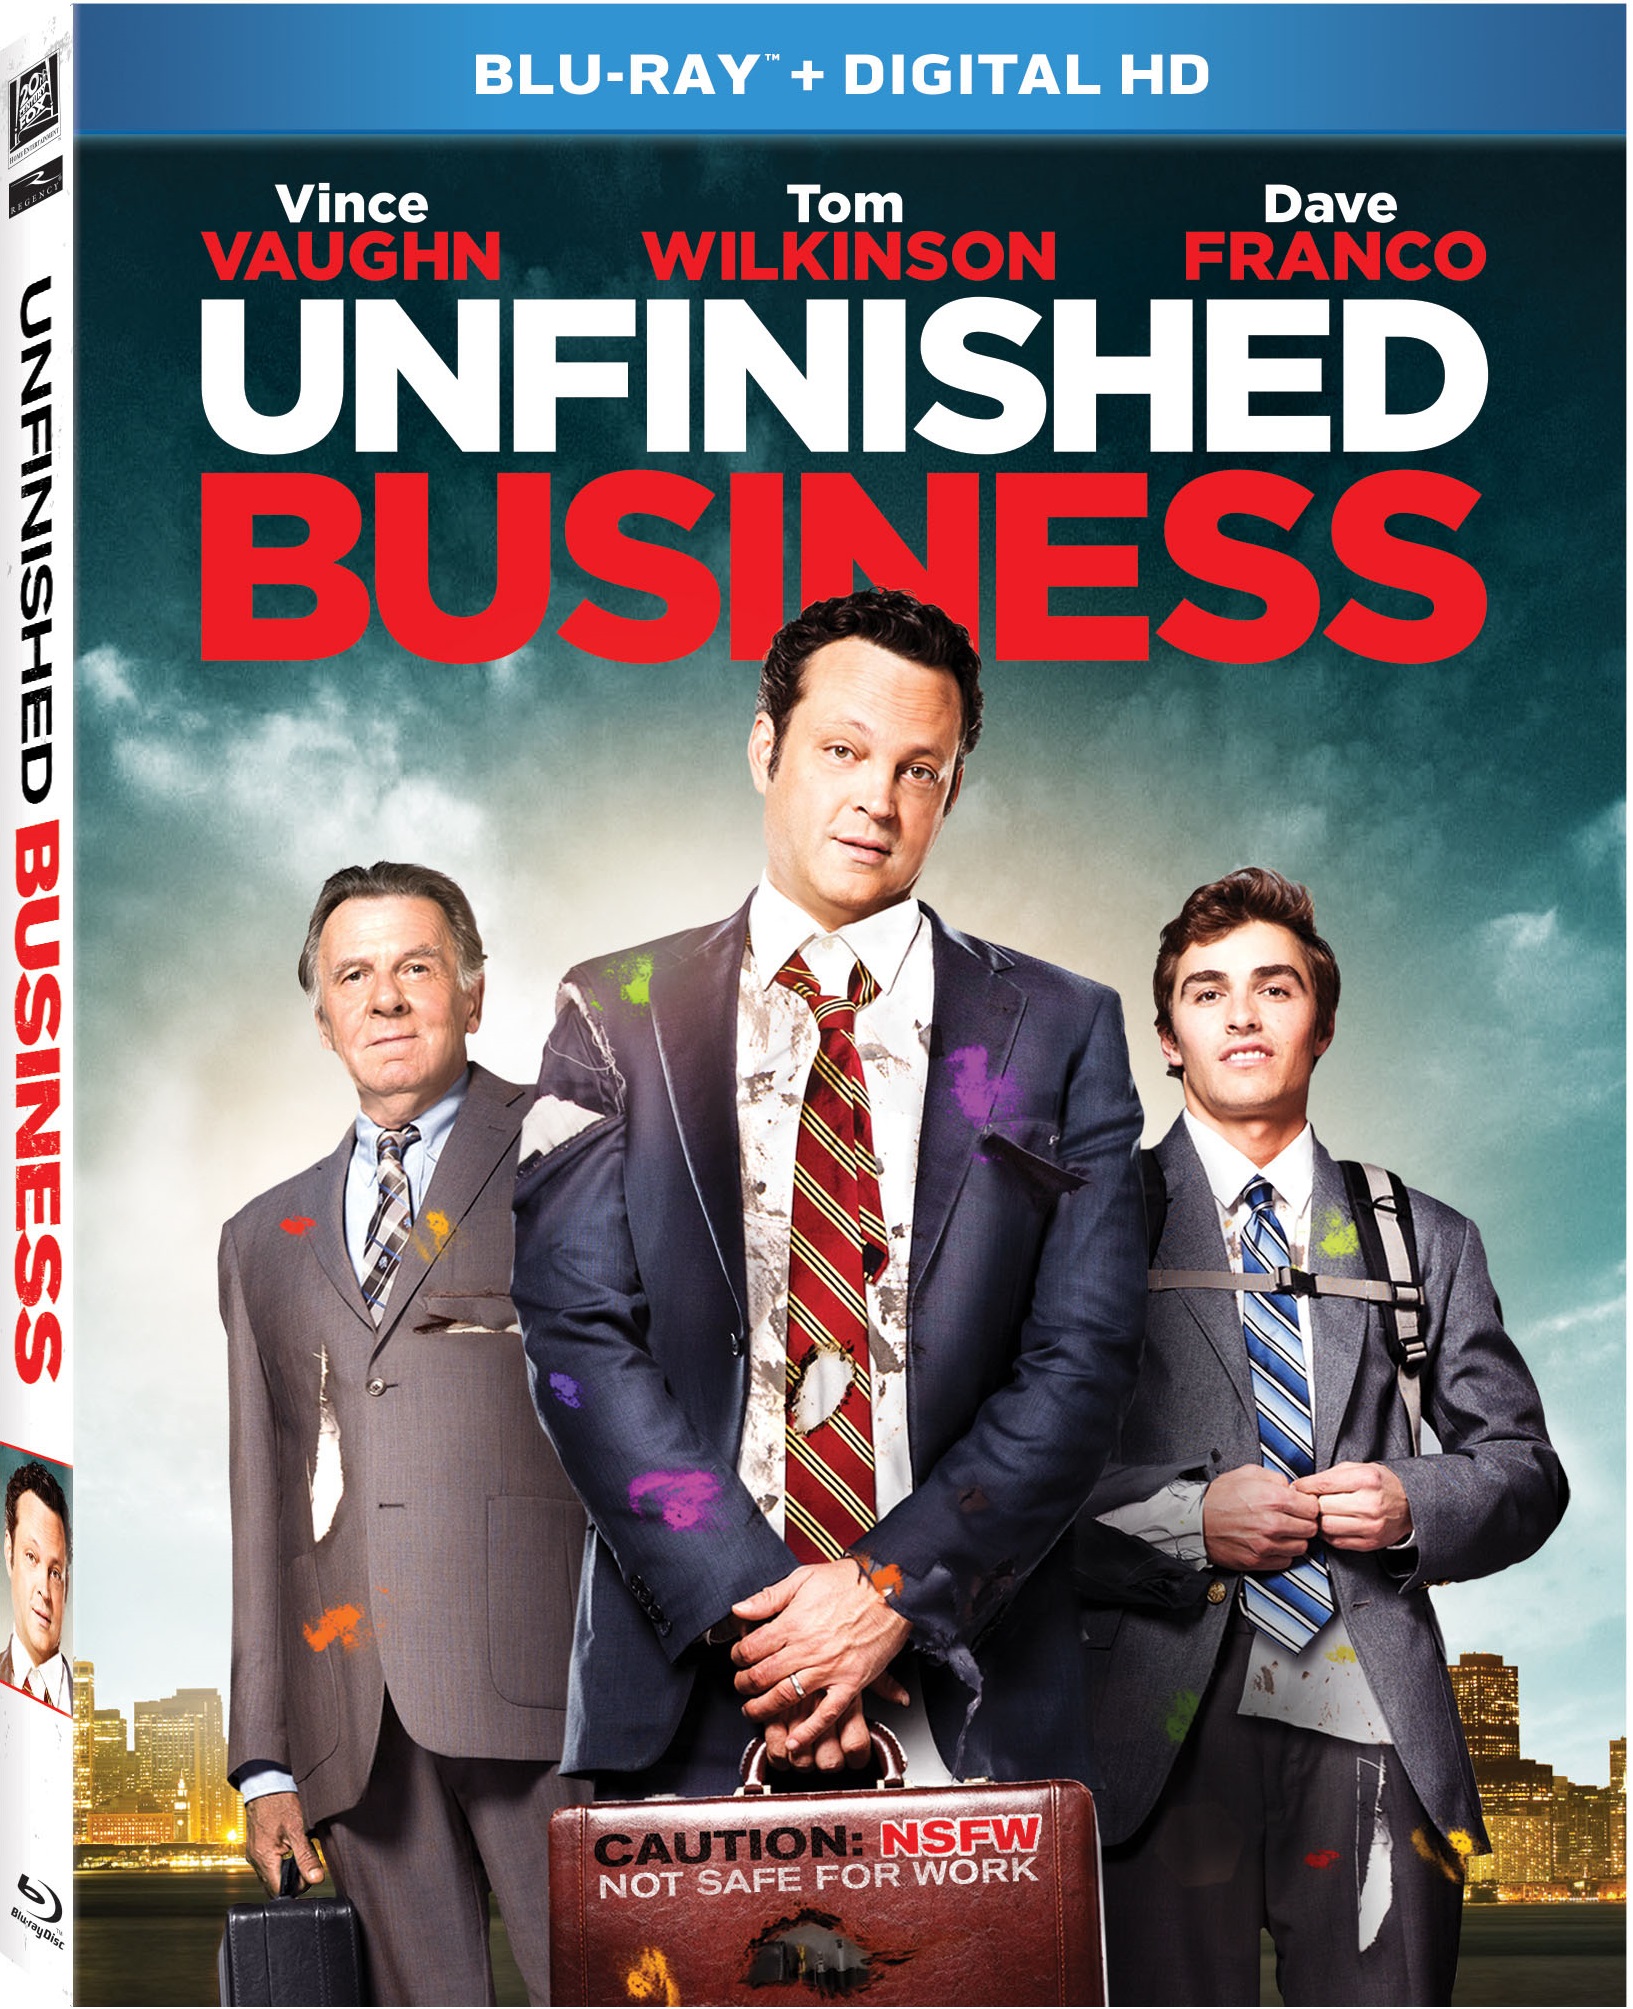 Unfinished_Business_BD_Oring